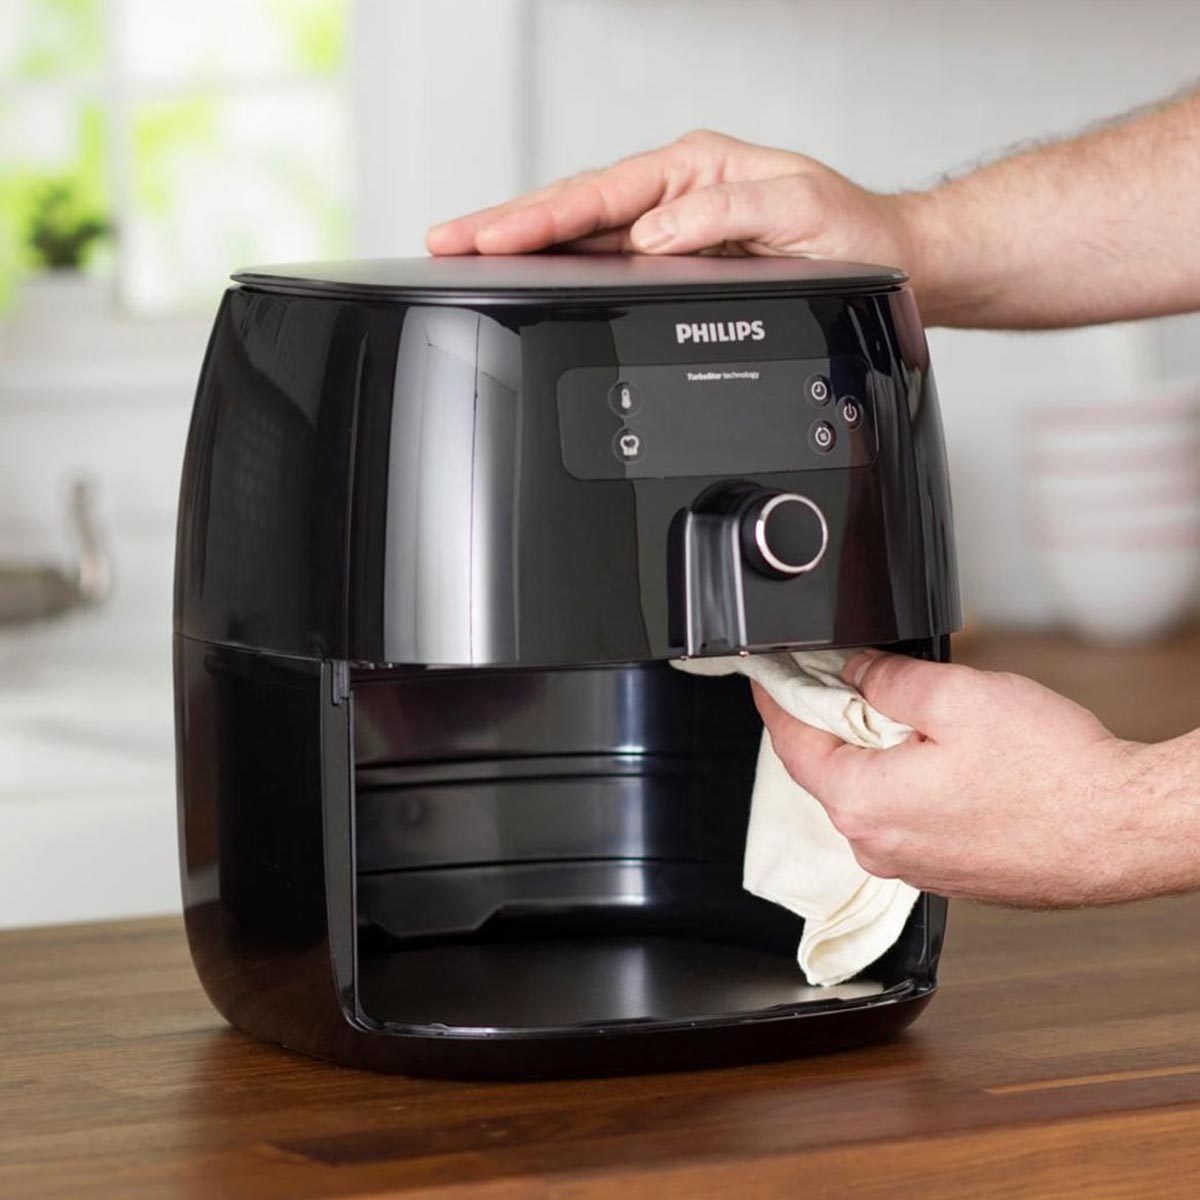 https://www.tasteofhome.com/wp-content/uploads/2022/01/https-www.tasteofhome.com-wp-content-uploads-2019-11-cleaning-airfryer_WCICINRB19_PU4352_C06_26_3bC_1200x1200.jpg?fit=700%2C1024